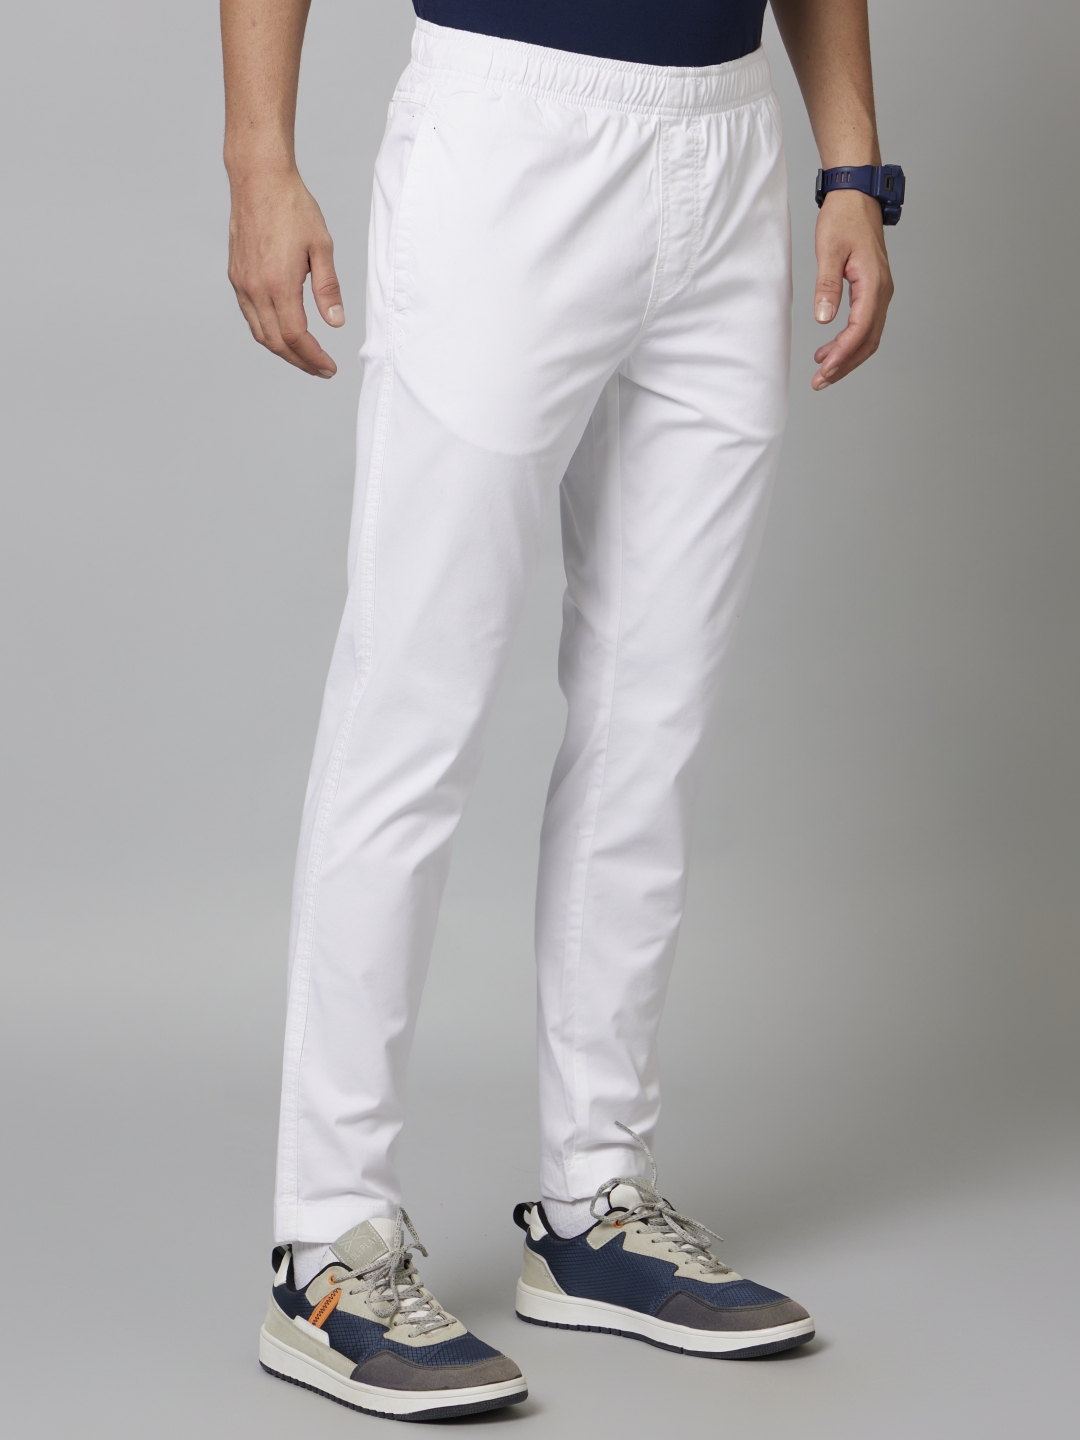 Buy White Trousers & Pants for Men by Styli Online | Ajio.com